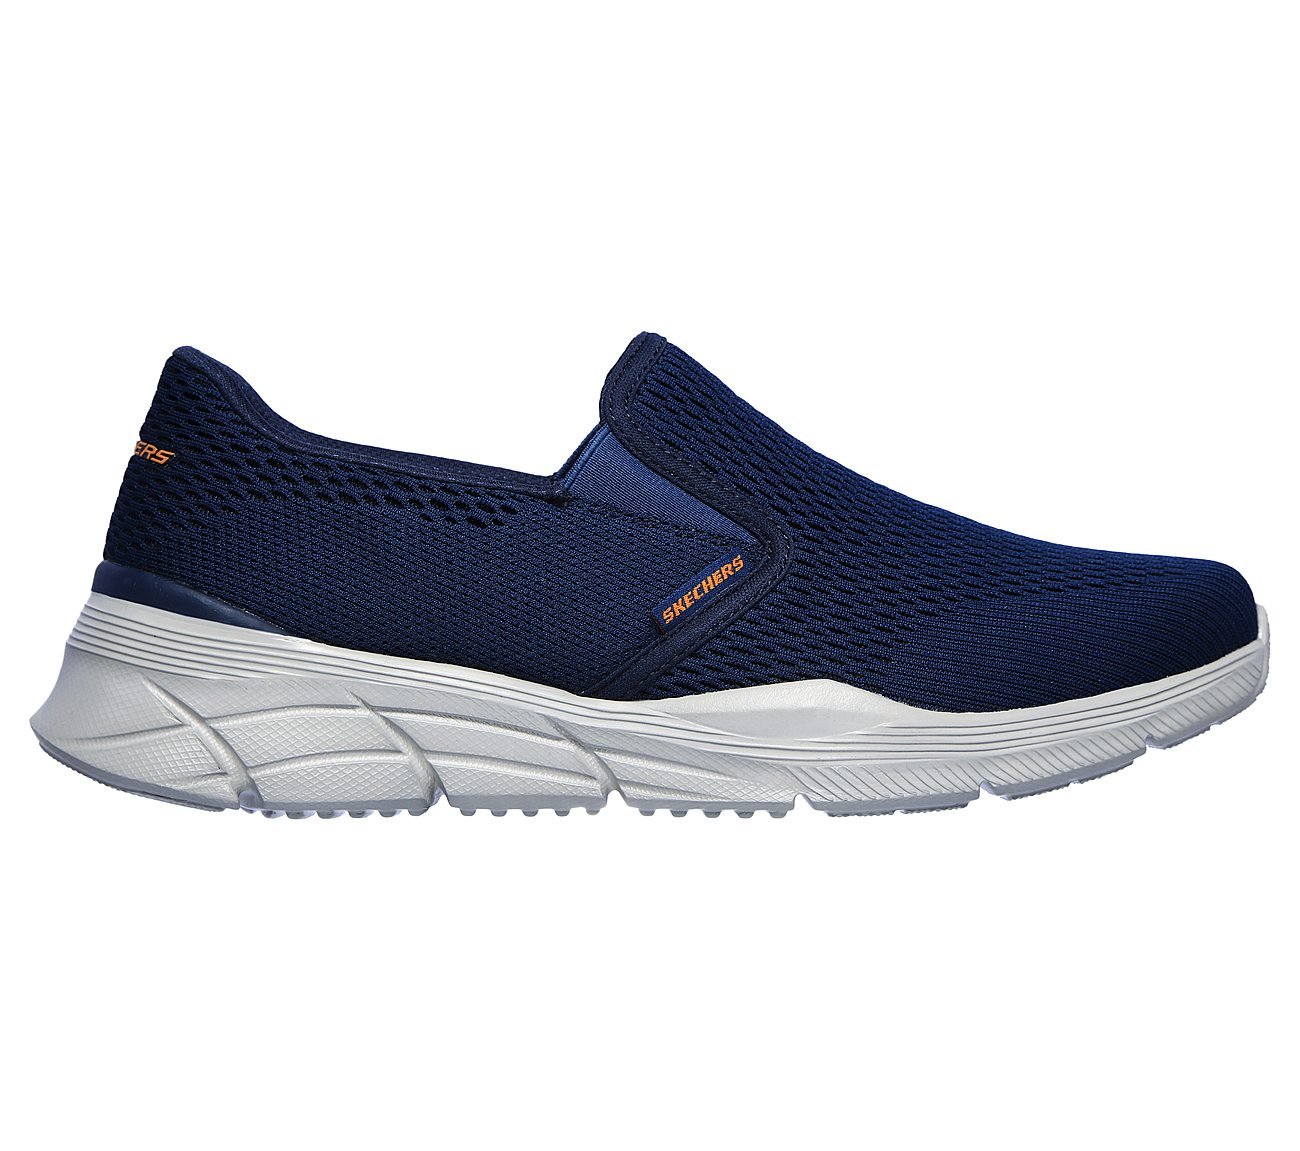 EQUALIZER 4.0 - TRIPLE PLAY, NAVY/ORANGE Footwear Right View